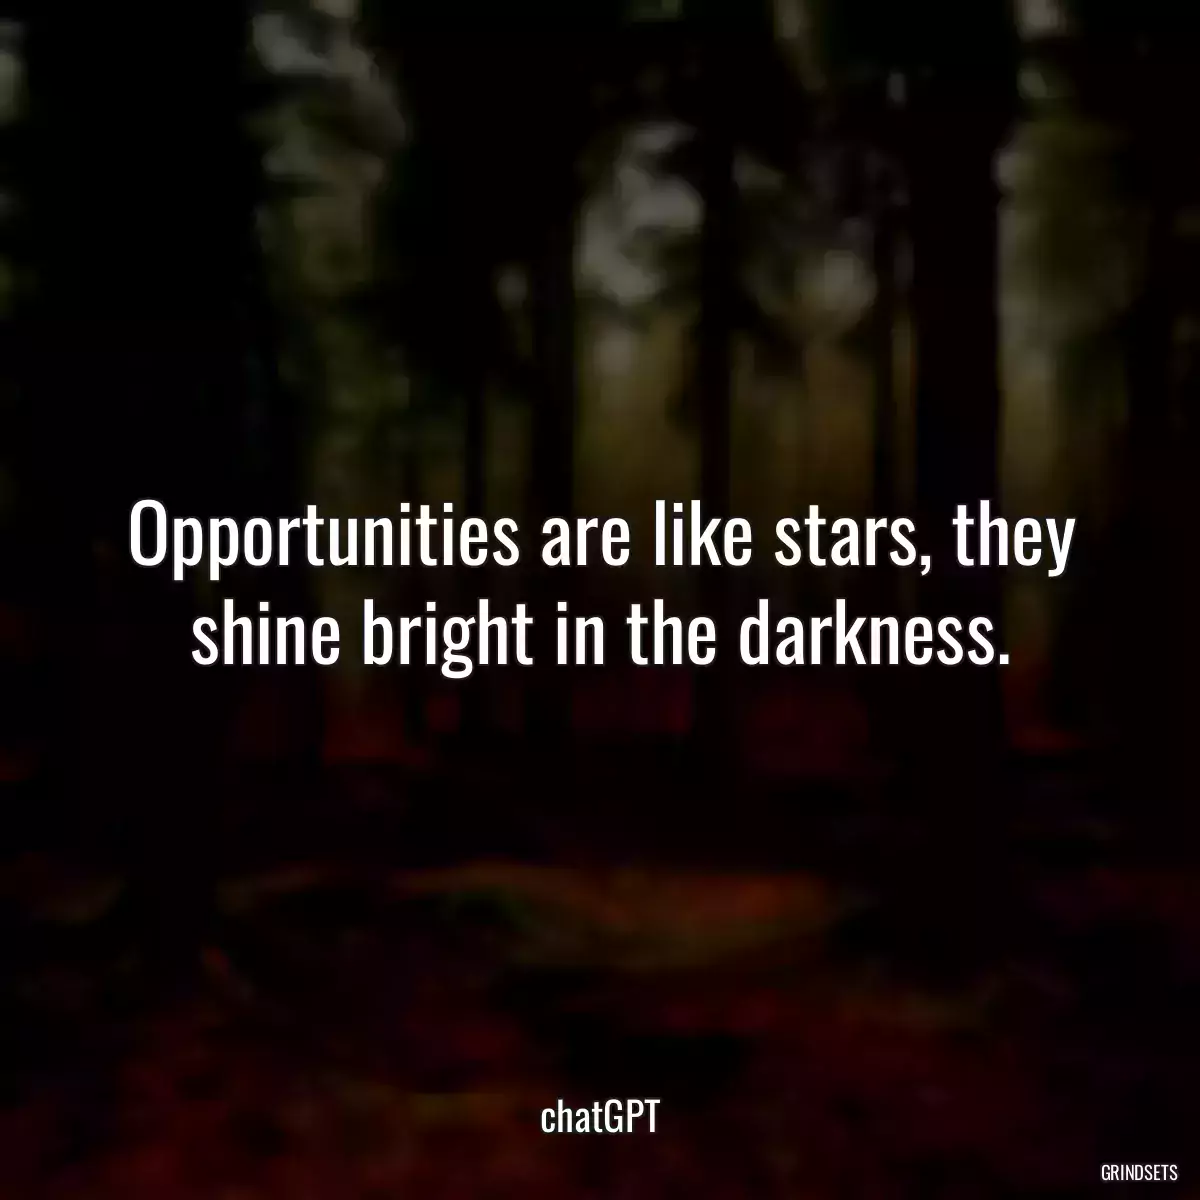 Opportunities are like stars, they shine bright in the darkness.